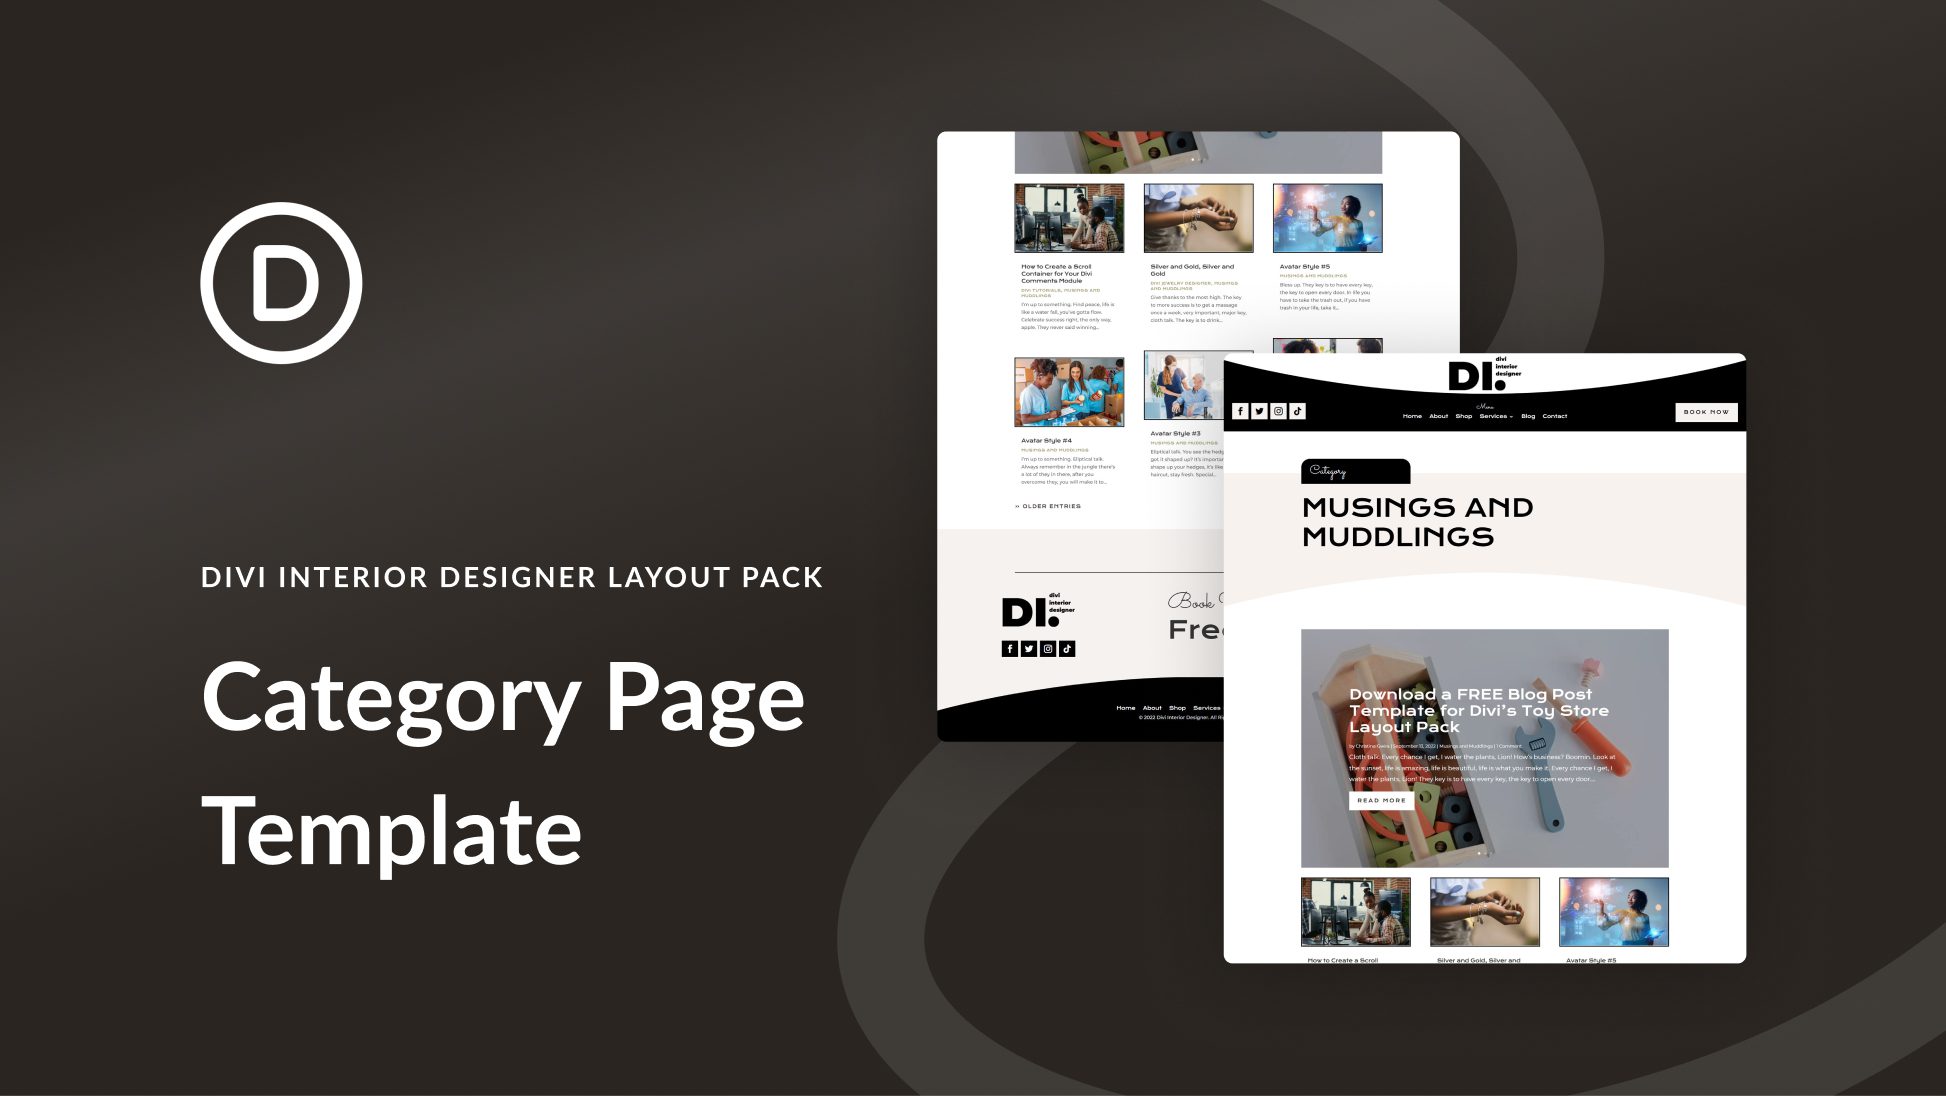 Download a FREE Category Page Template for Divi’s Interior Designer Layout Pack